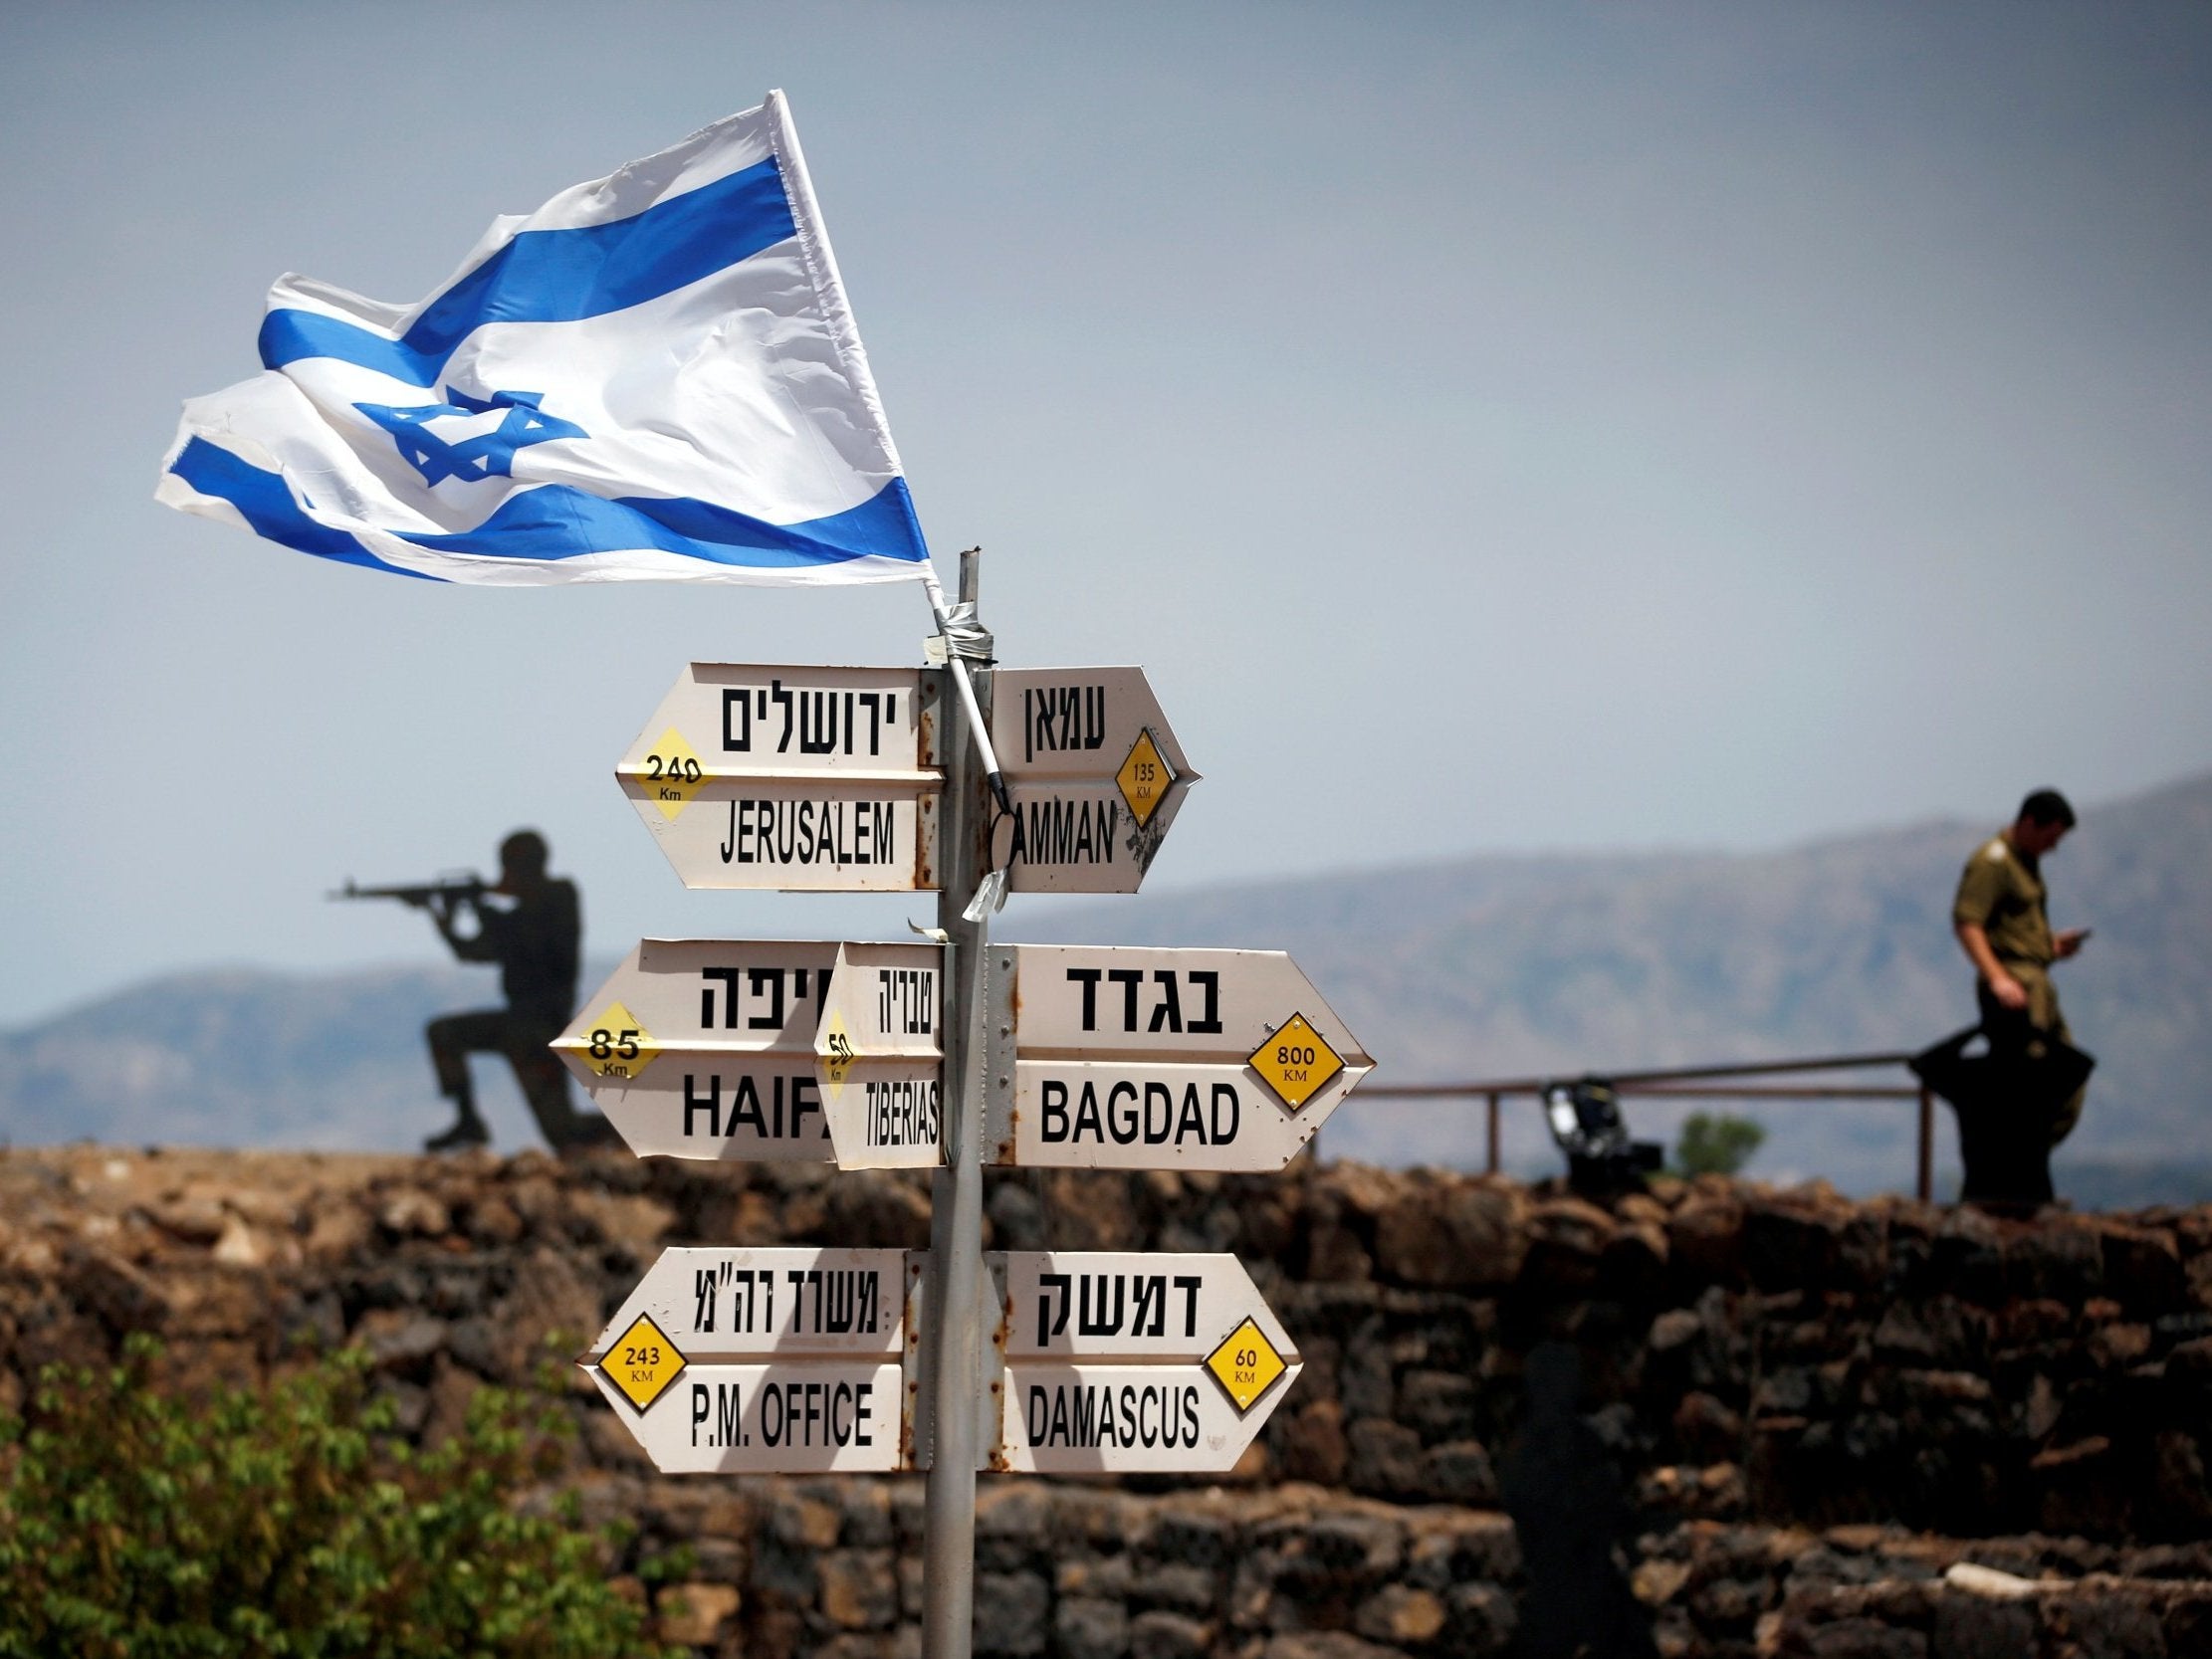 An Israeli soldier stands next to signs pointing out distances to different cities on Mount Bental, an observation post in the Israeli-occupied Golan Heights that overlooks the Syrian side of the Quneitra crossing